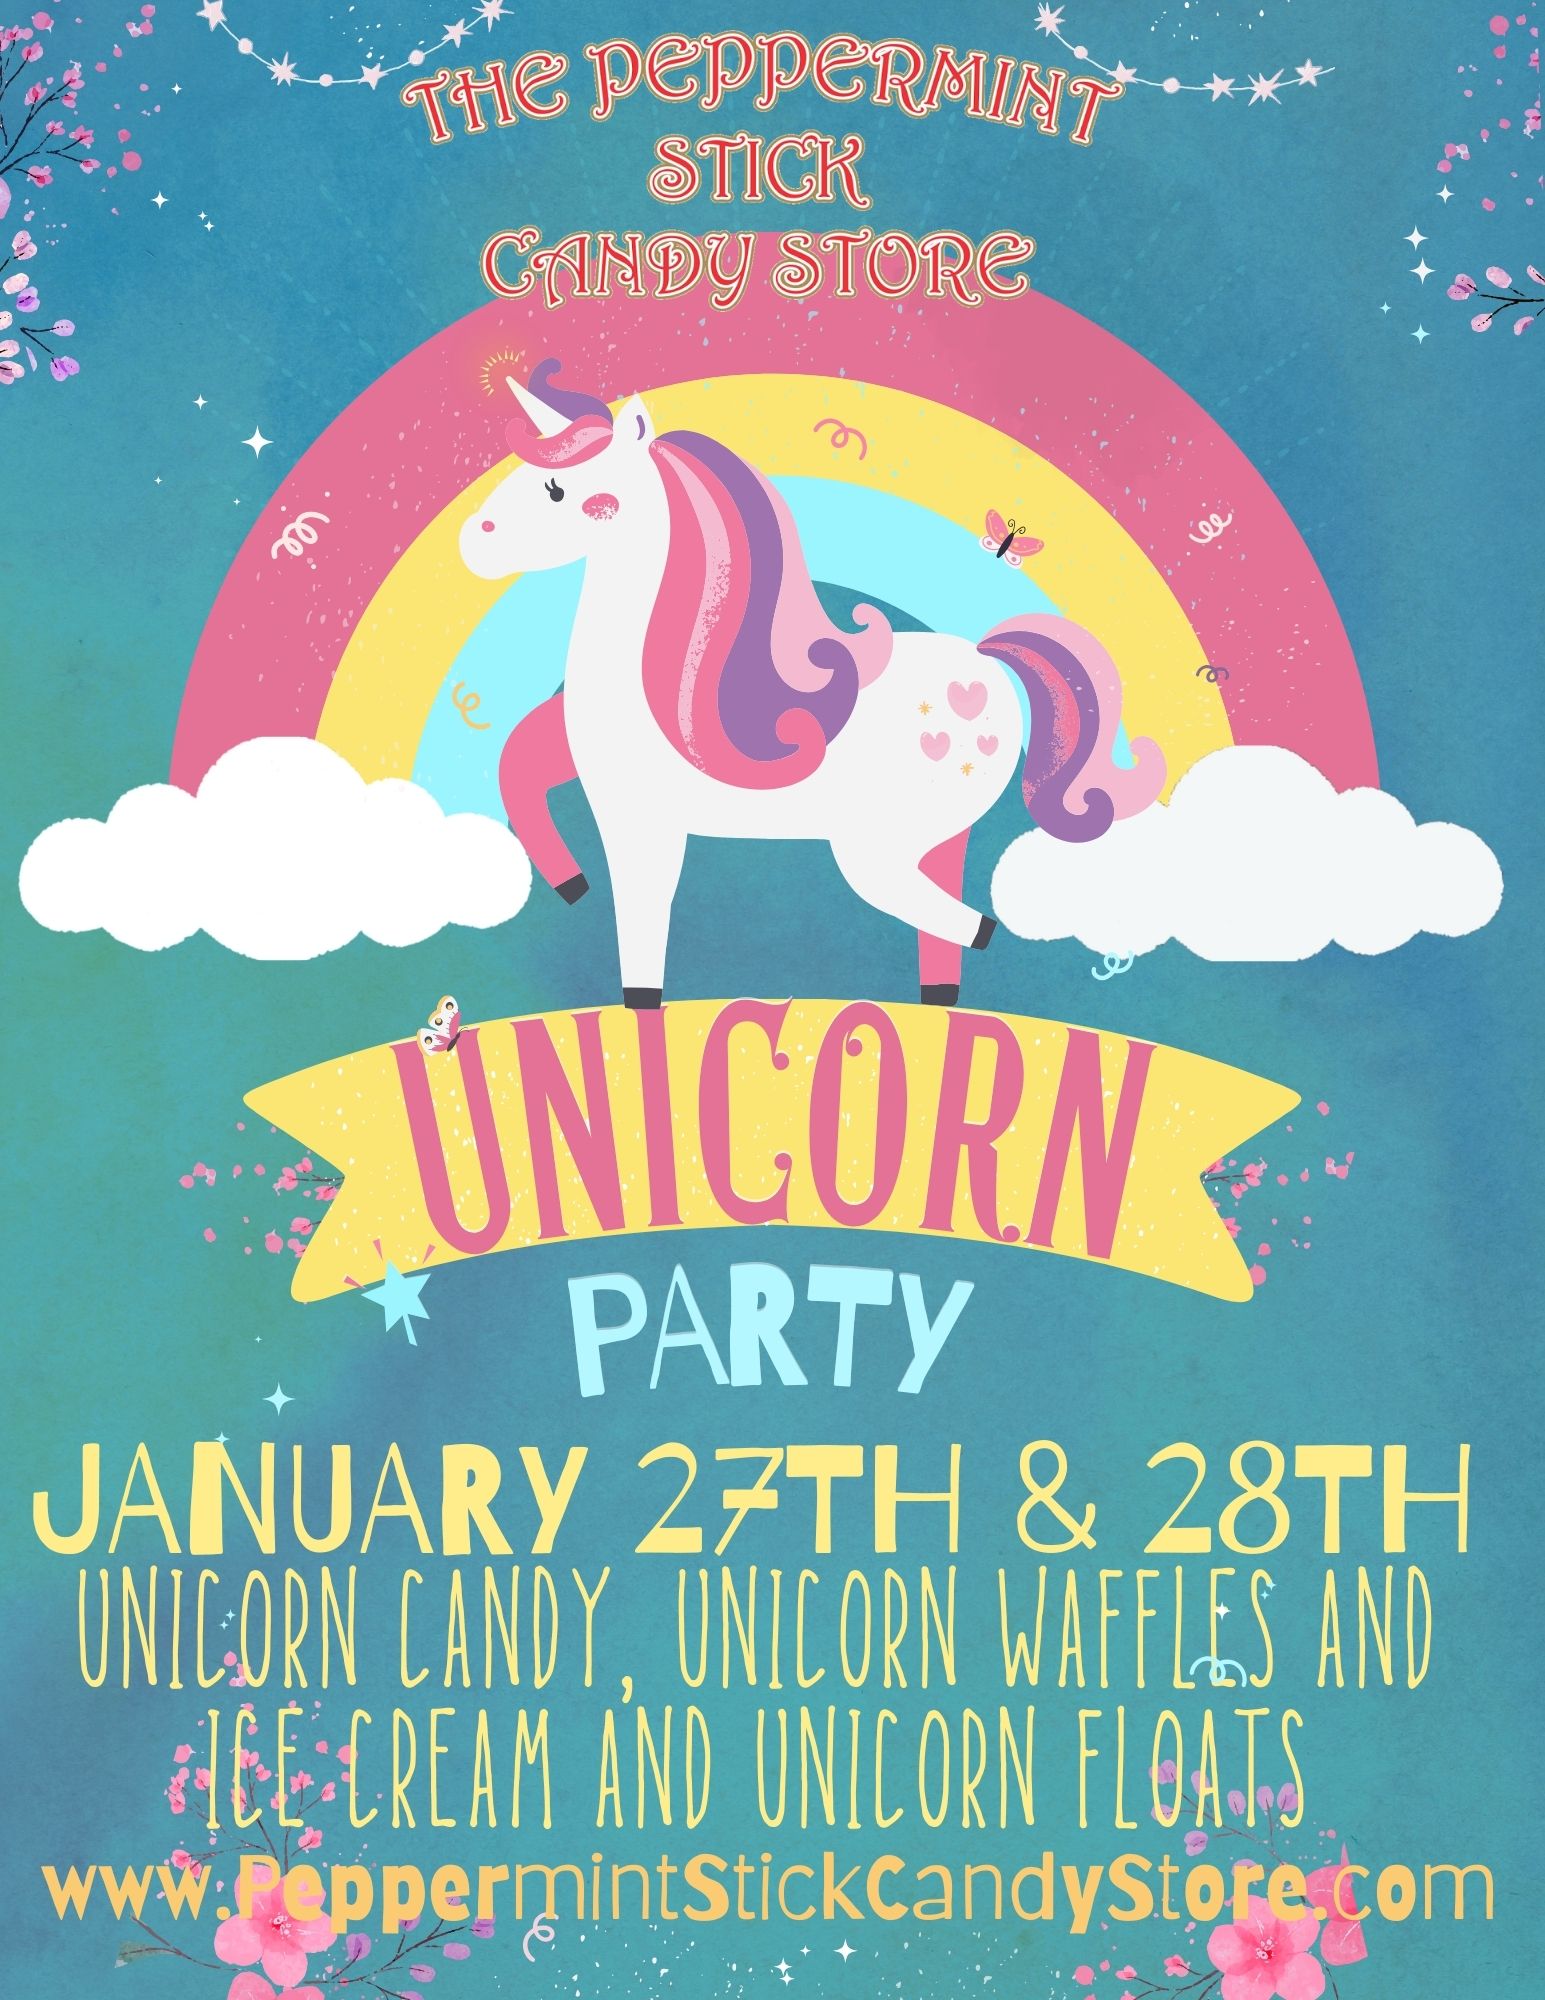 Unicorn and a rainbow with party information